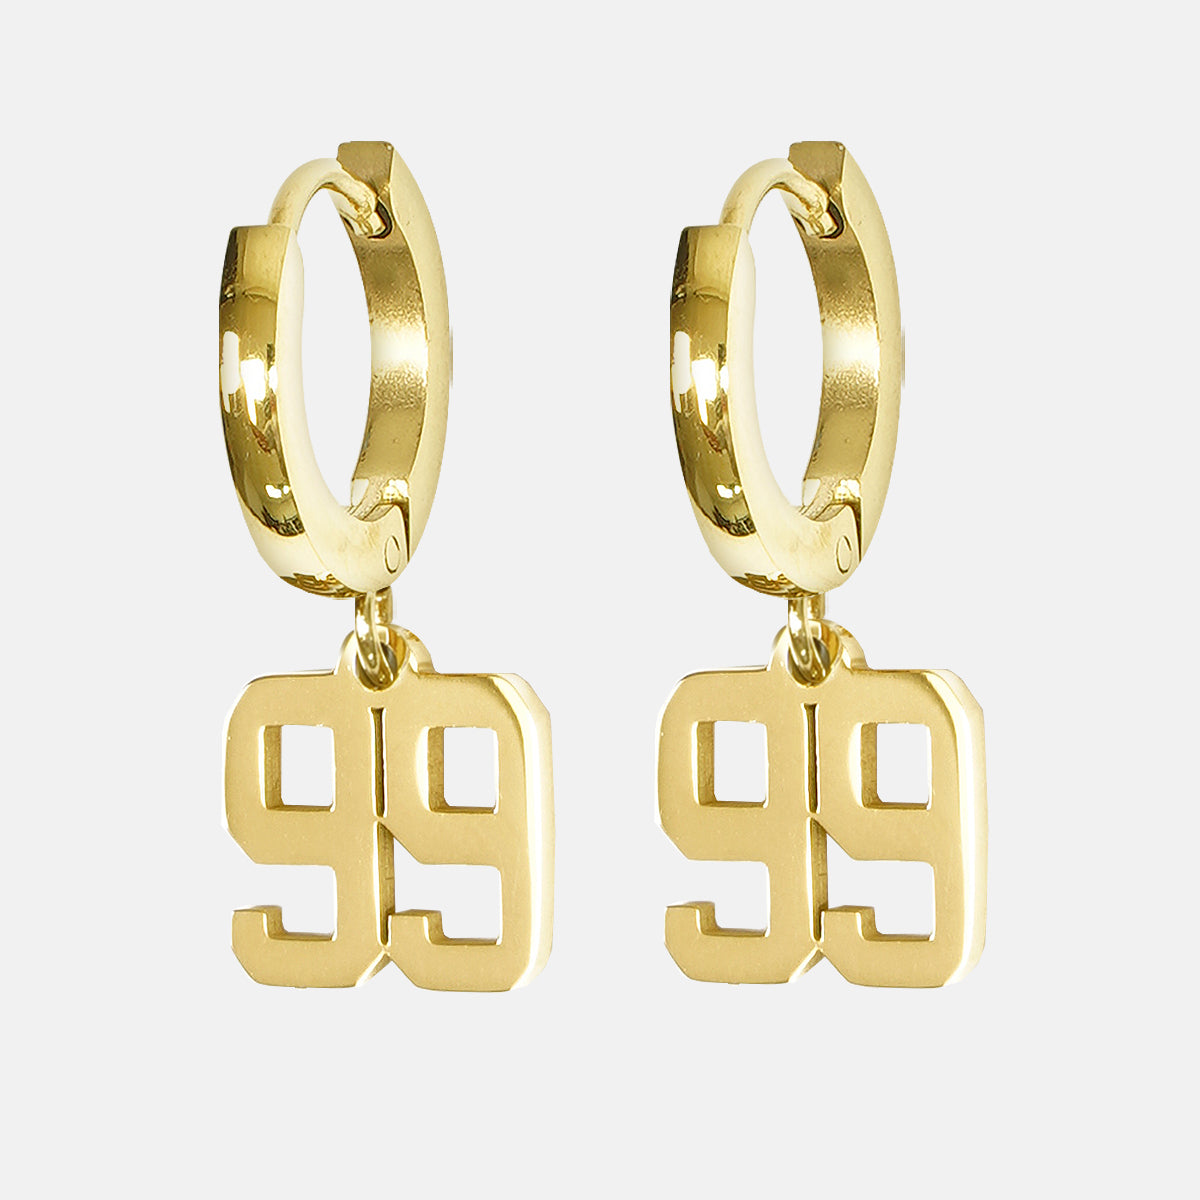 99 Number Earring - Gold Plated Stainless Steel